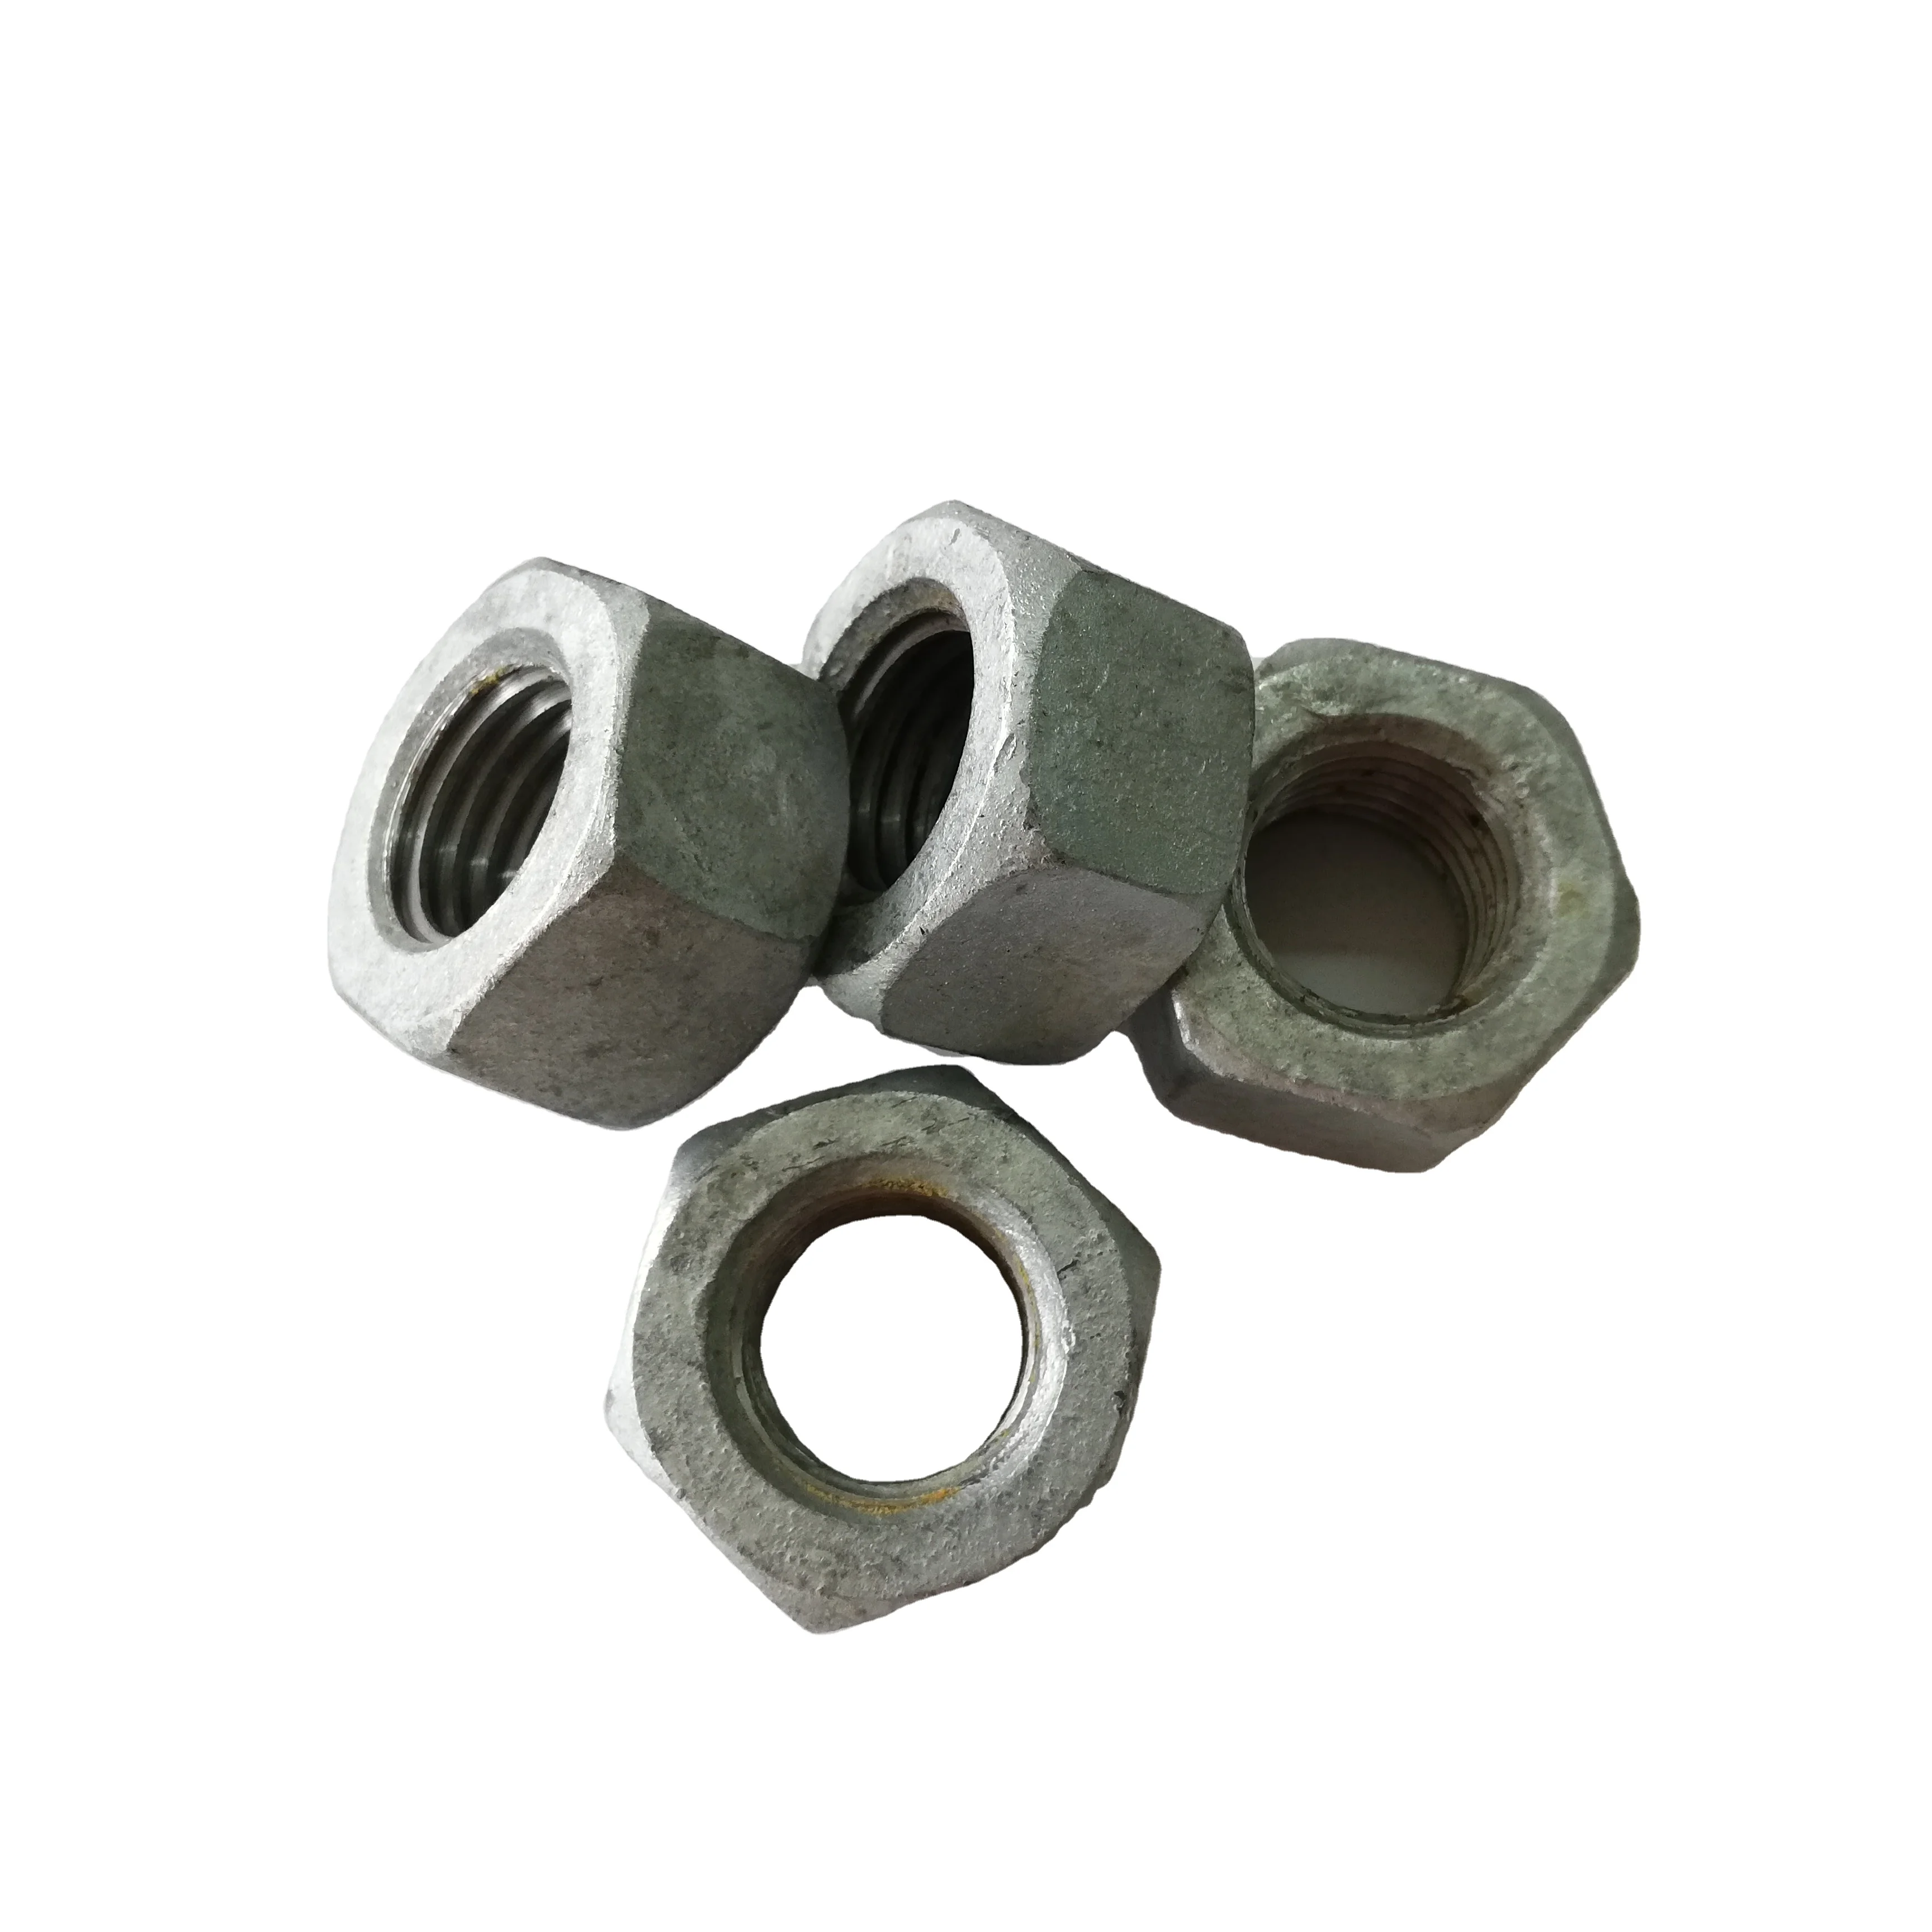 China ASTM A194 Gr.2HM Heavy Hex Nuts Suppliers, Manufacturers - Factory  Direct Price - Haixin